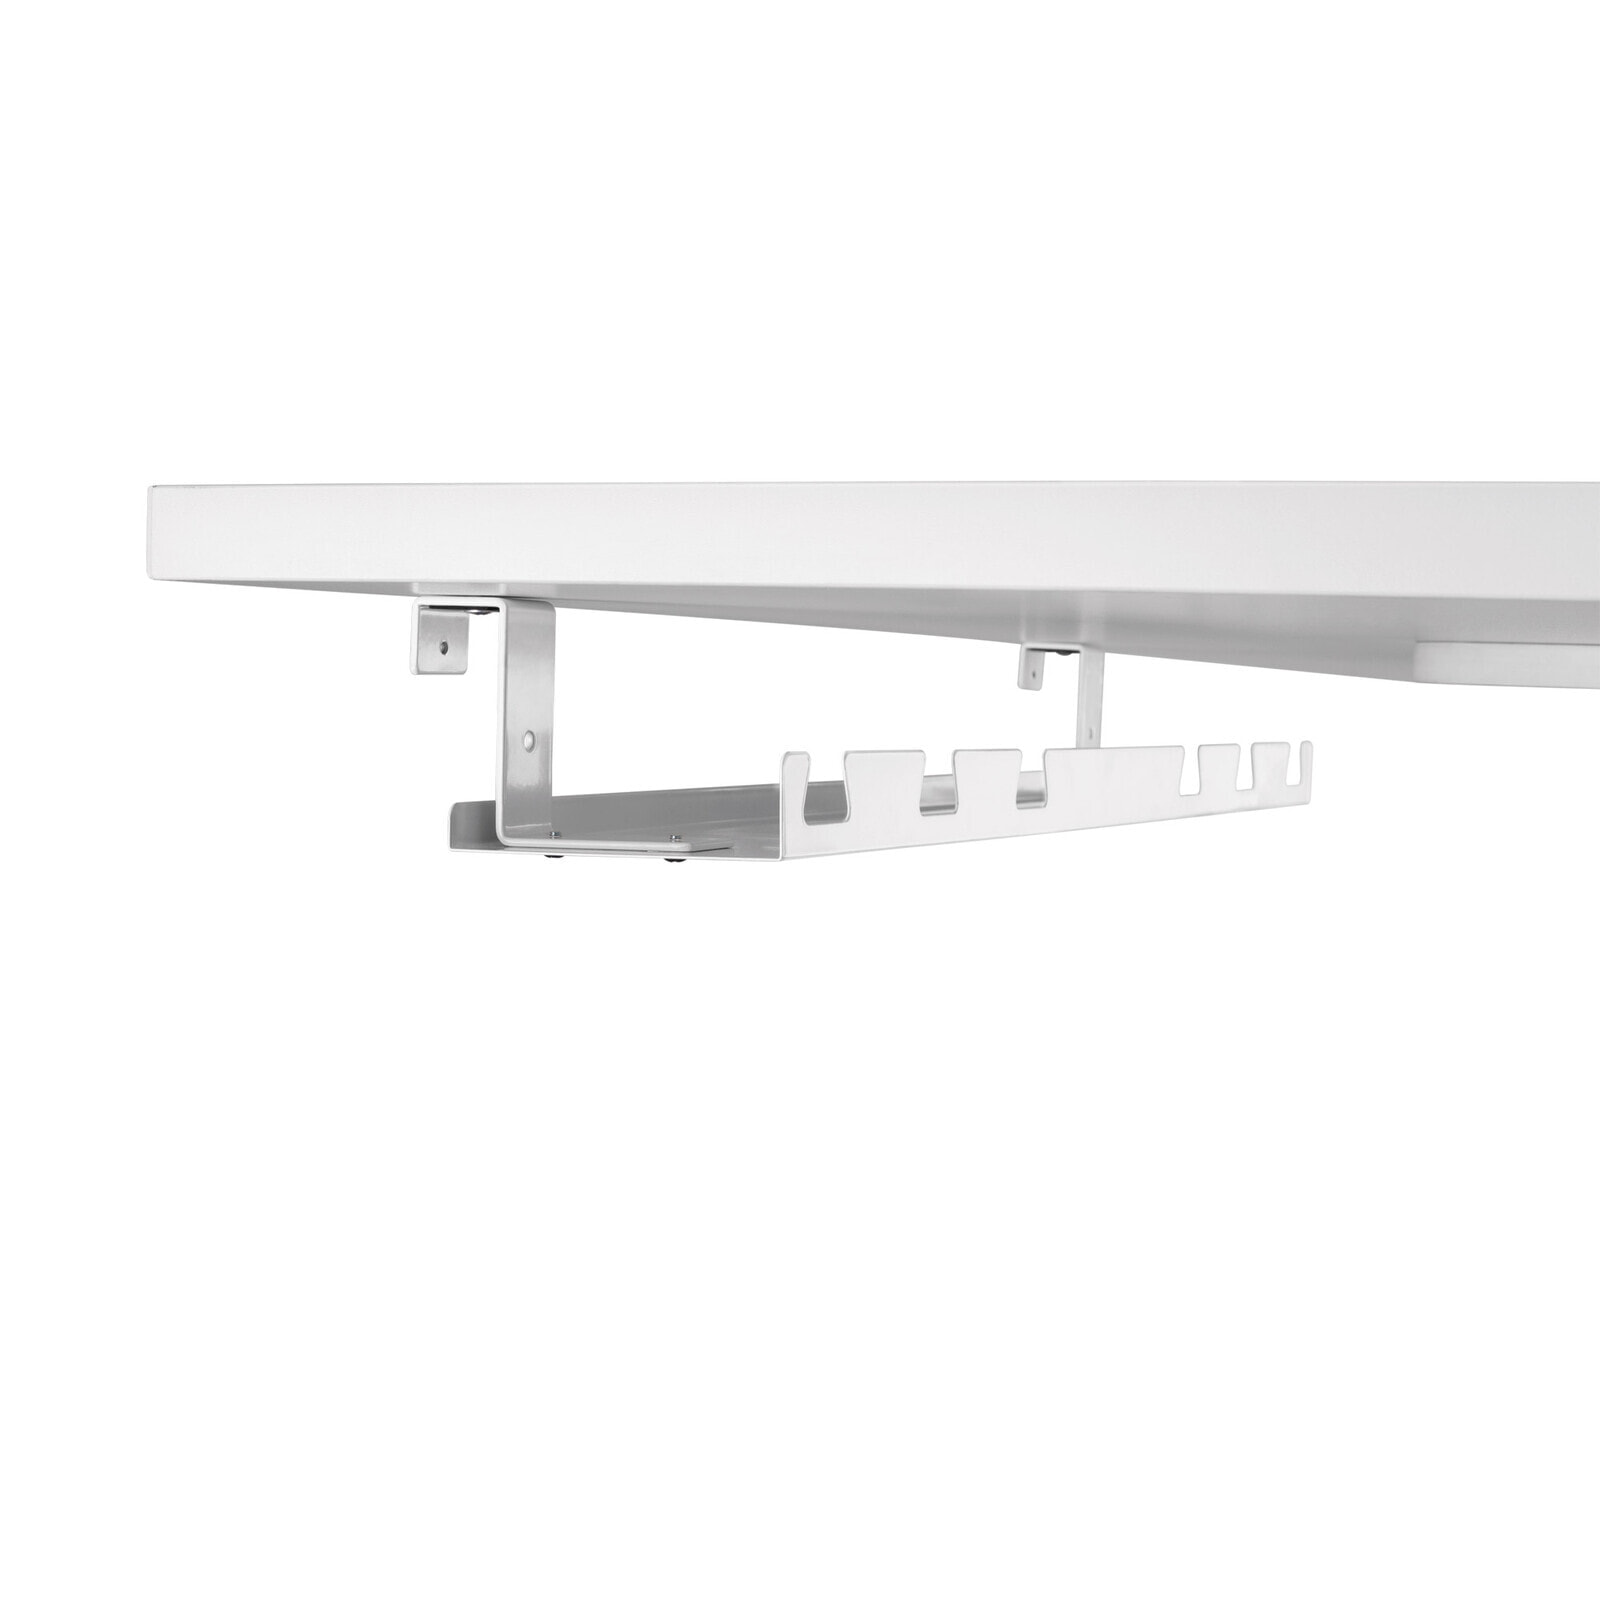 Cable guide/shelf for under-table mounting - white